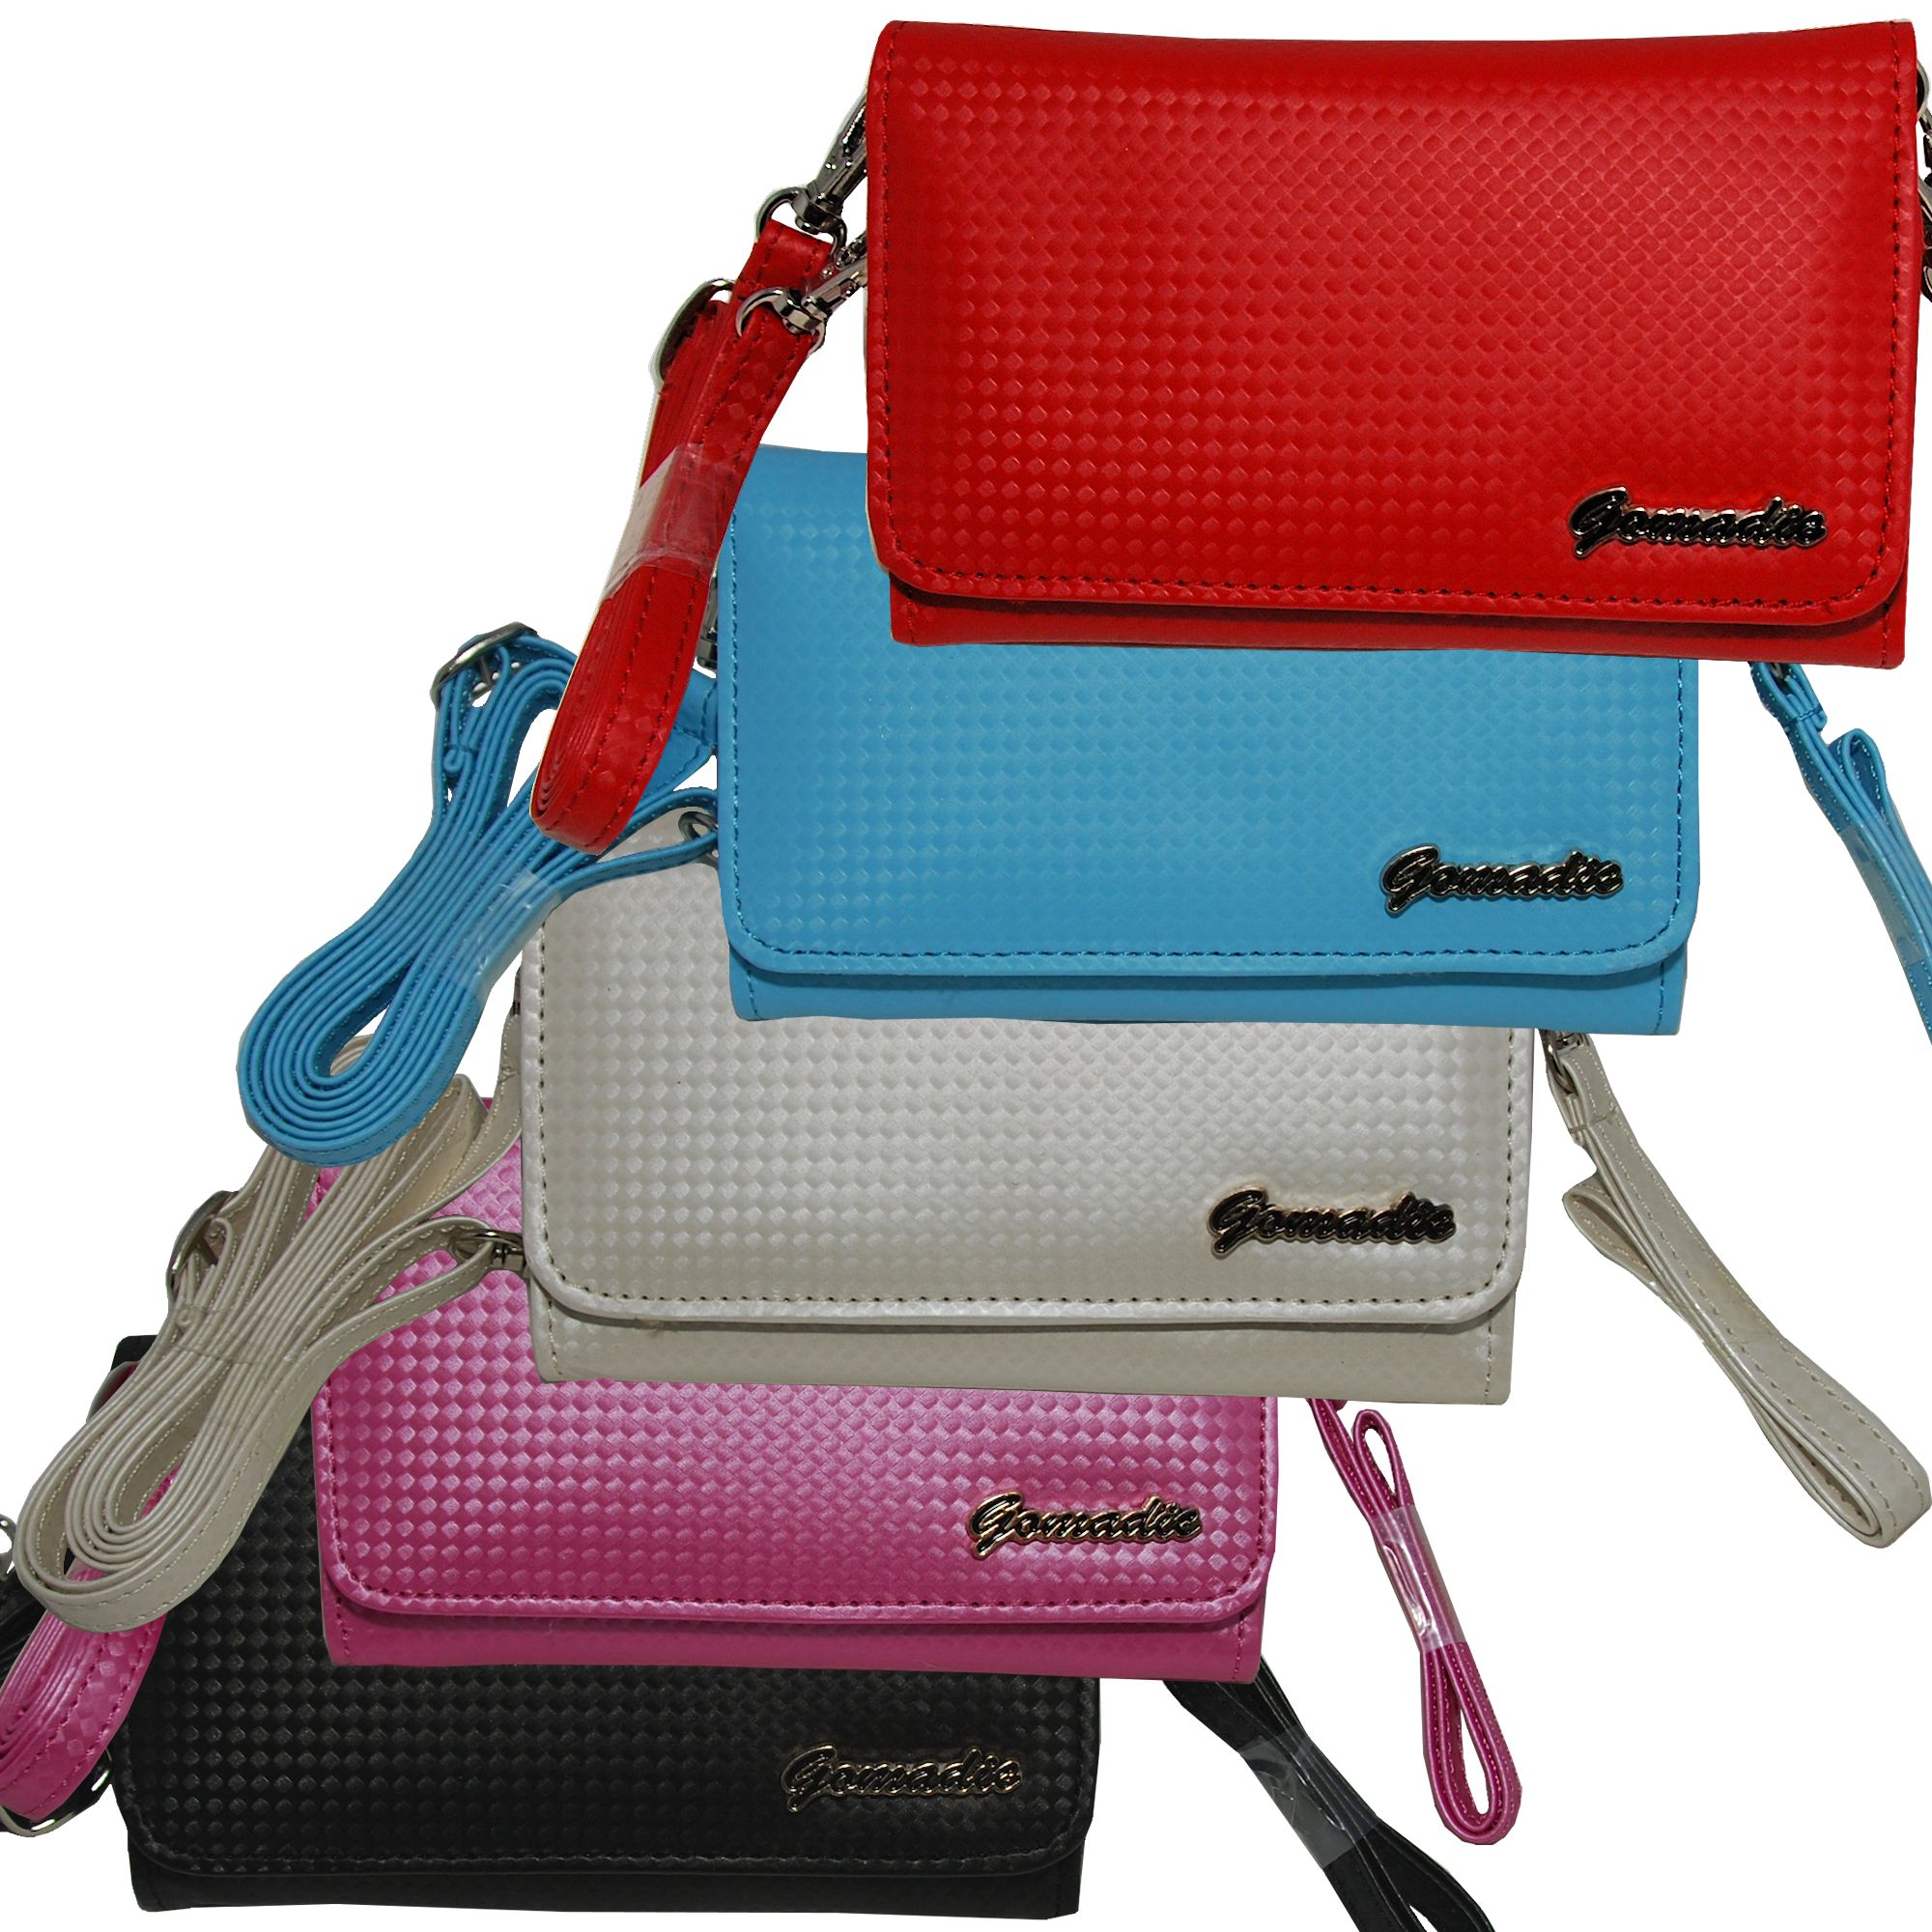 Purse Handbag Case for the Nokia 6126 6133 6136  - Color Options Blue Pink White Black and Red